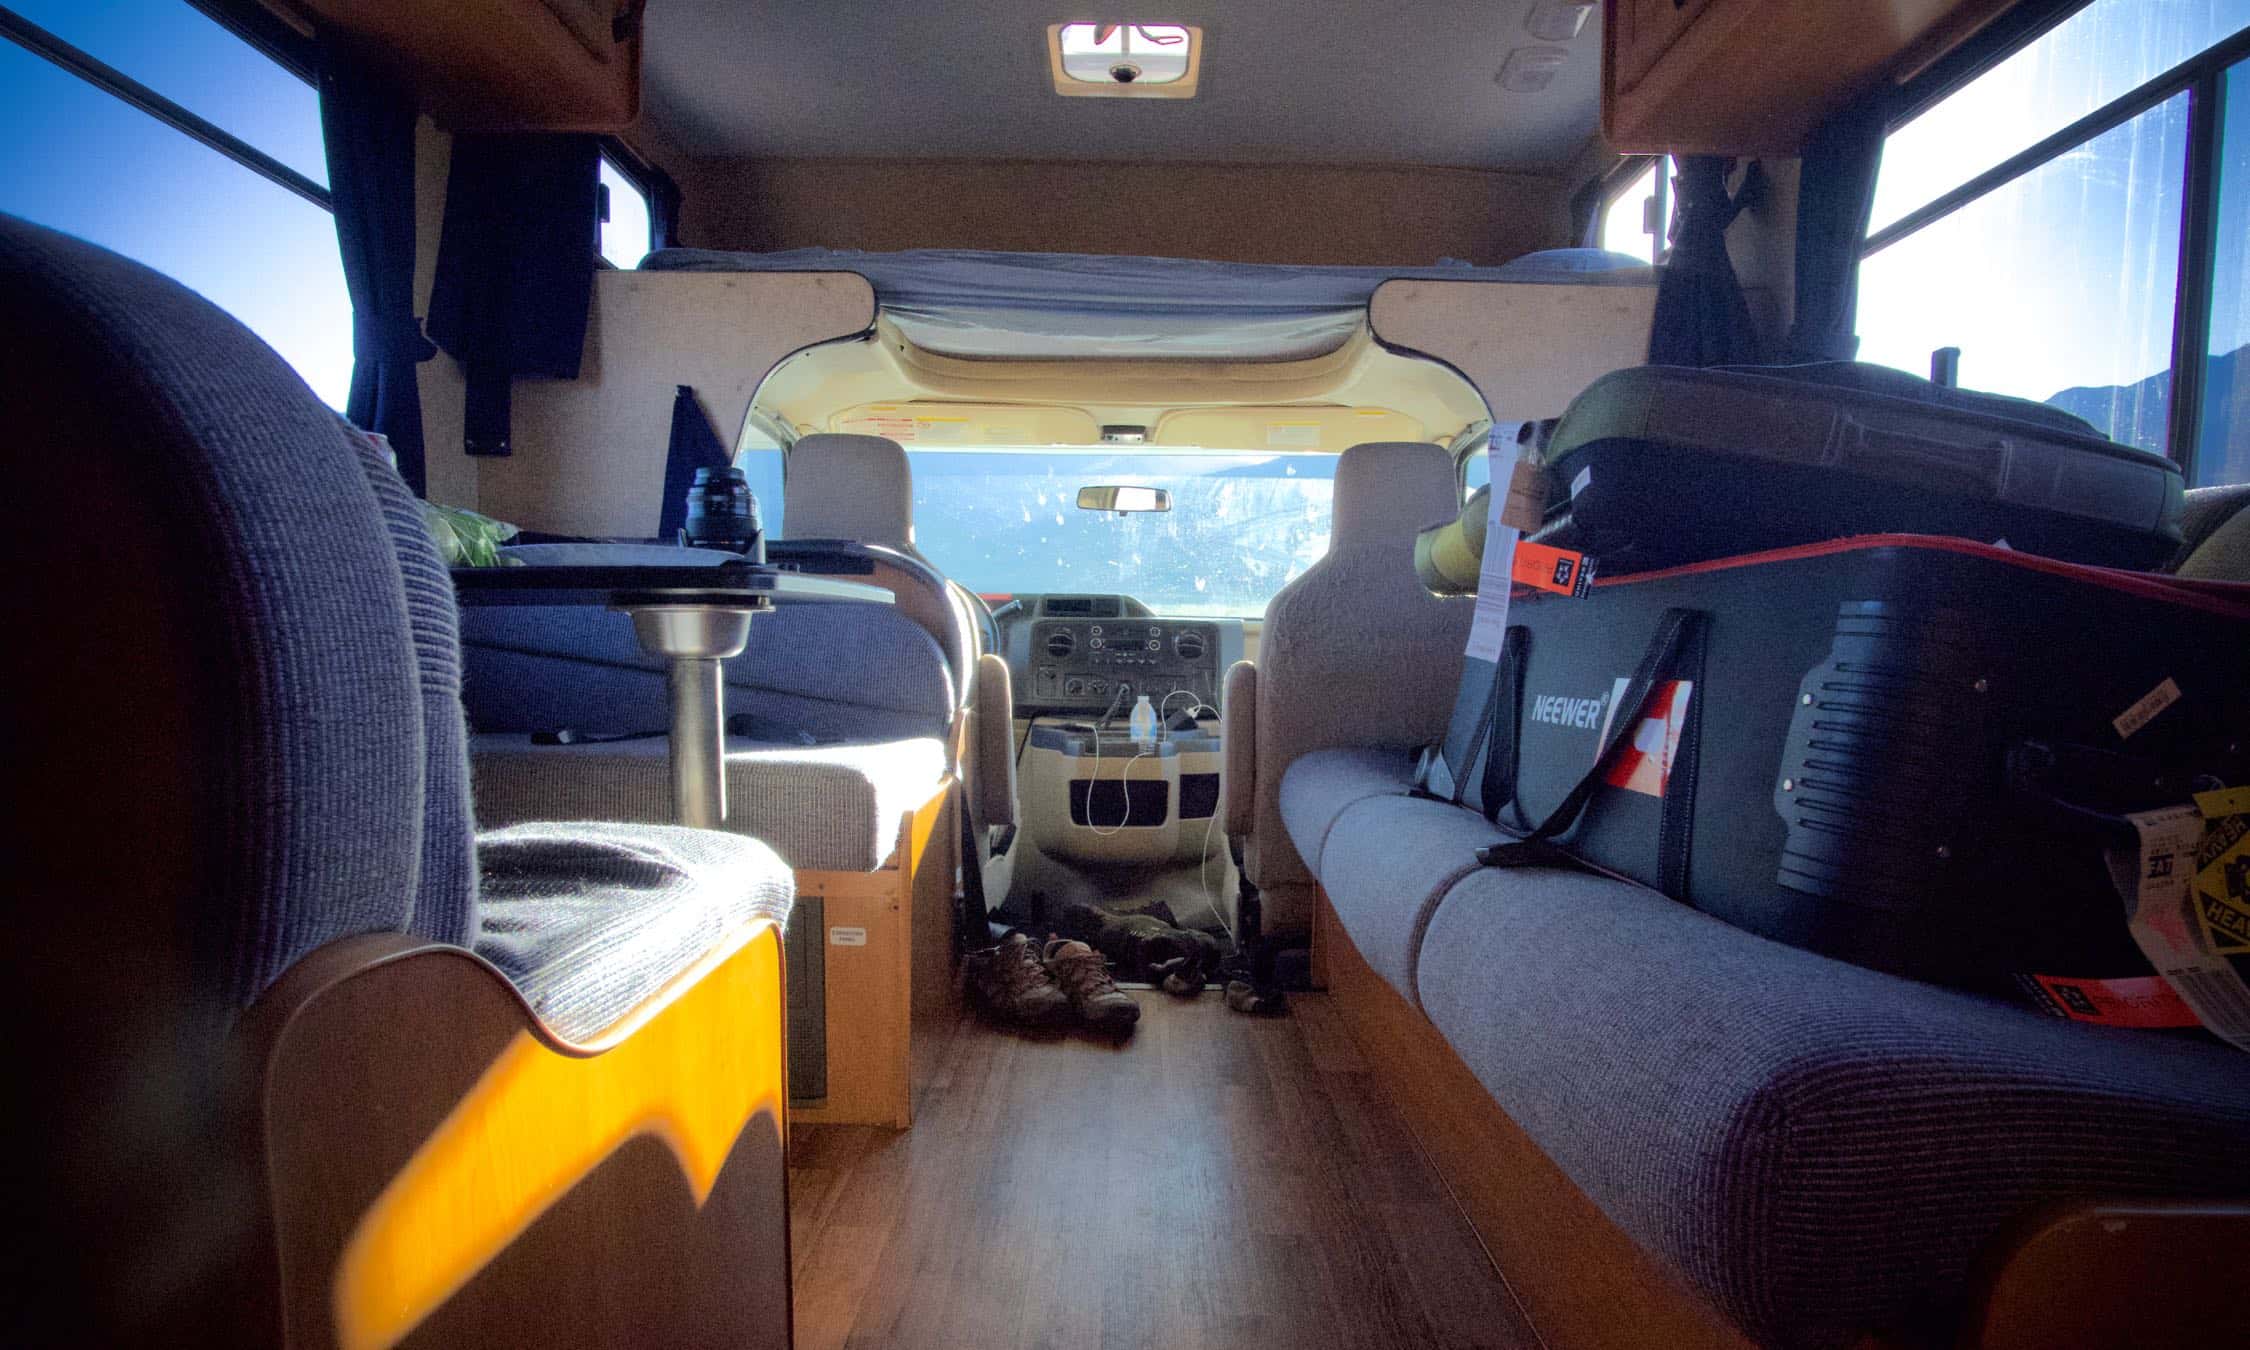 The RV is big on the outside, but it can feel cramped inside.